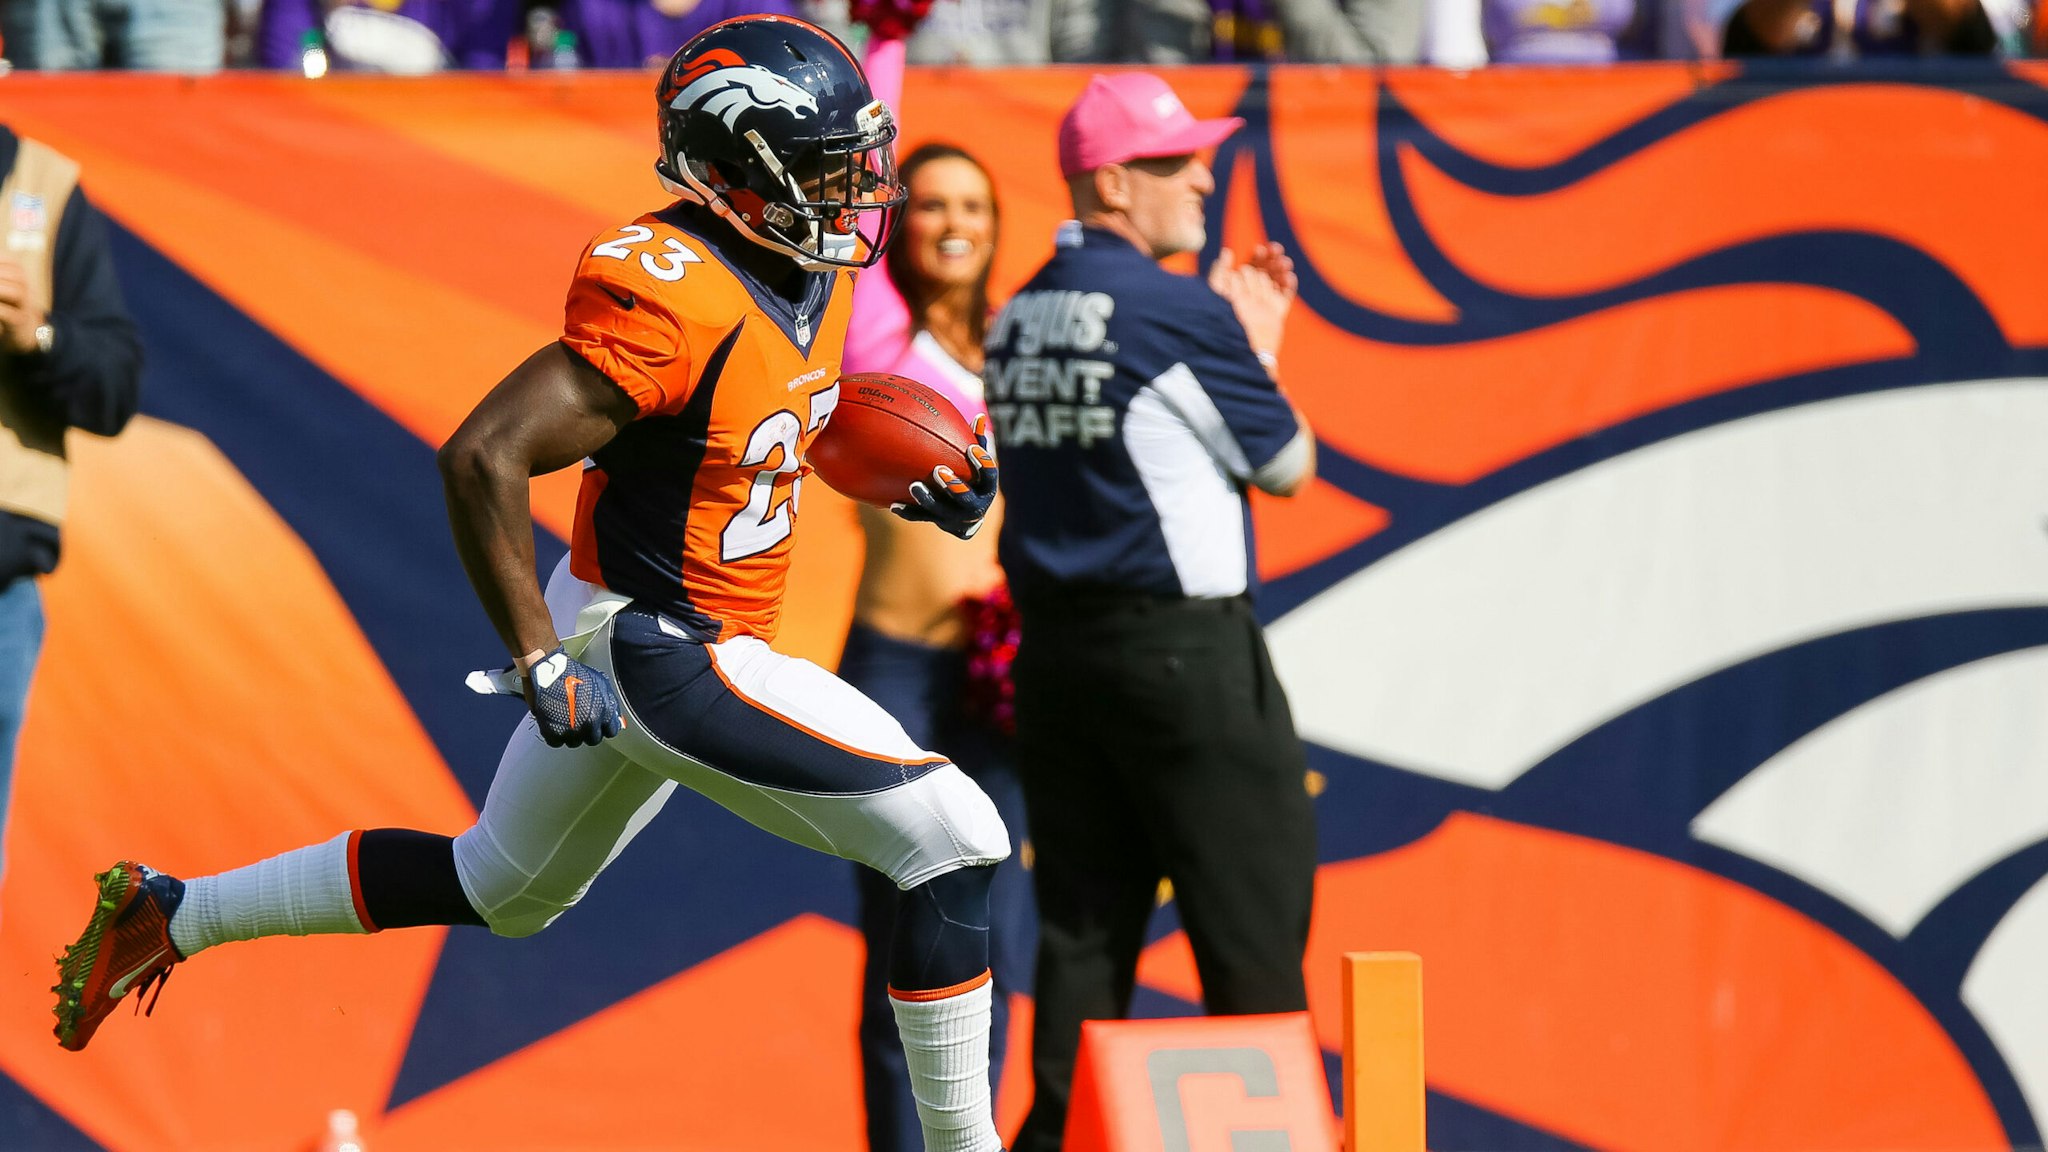 DENVER, CO - OCTOBER 4: Running back Ronnie Hillman #23 of the Denver Broncos scores a touchdown on an 72 yard rush in the second quarter of a game against the Minnesota Vikings at Sports Authority Field at Mile High on October 4, 2015 in Denver, Colorado.